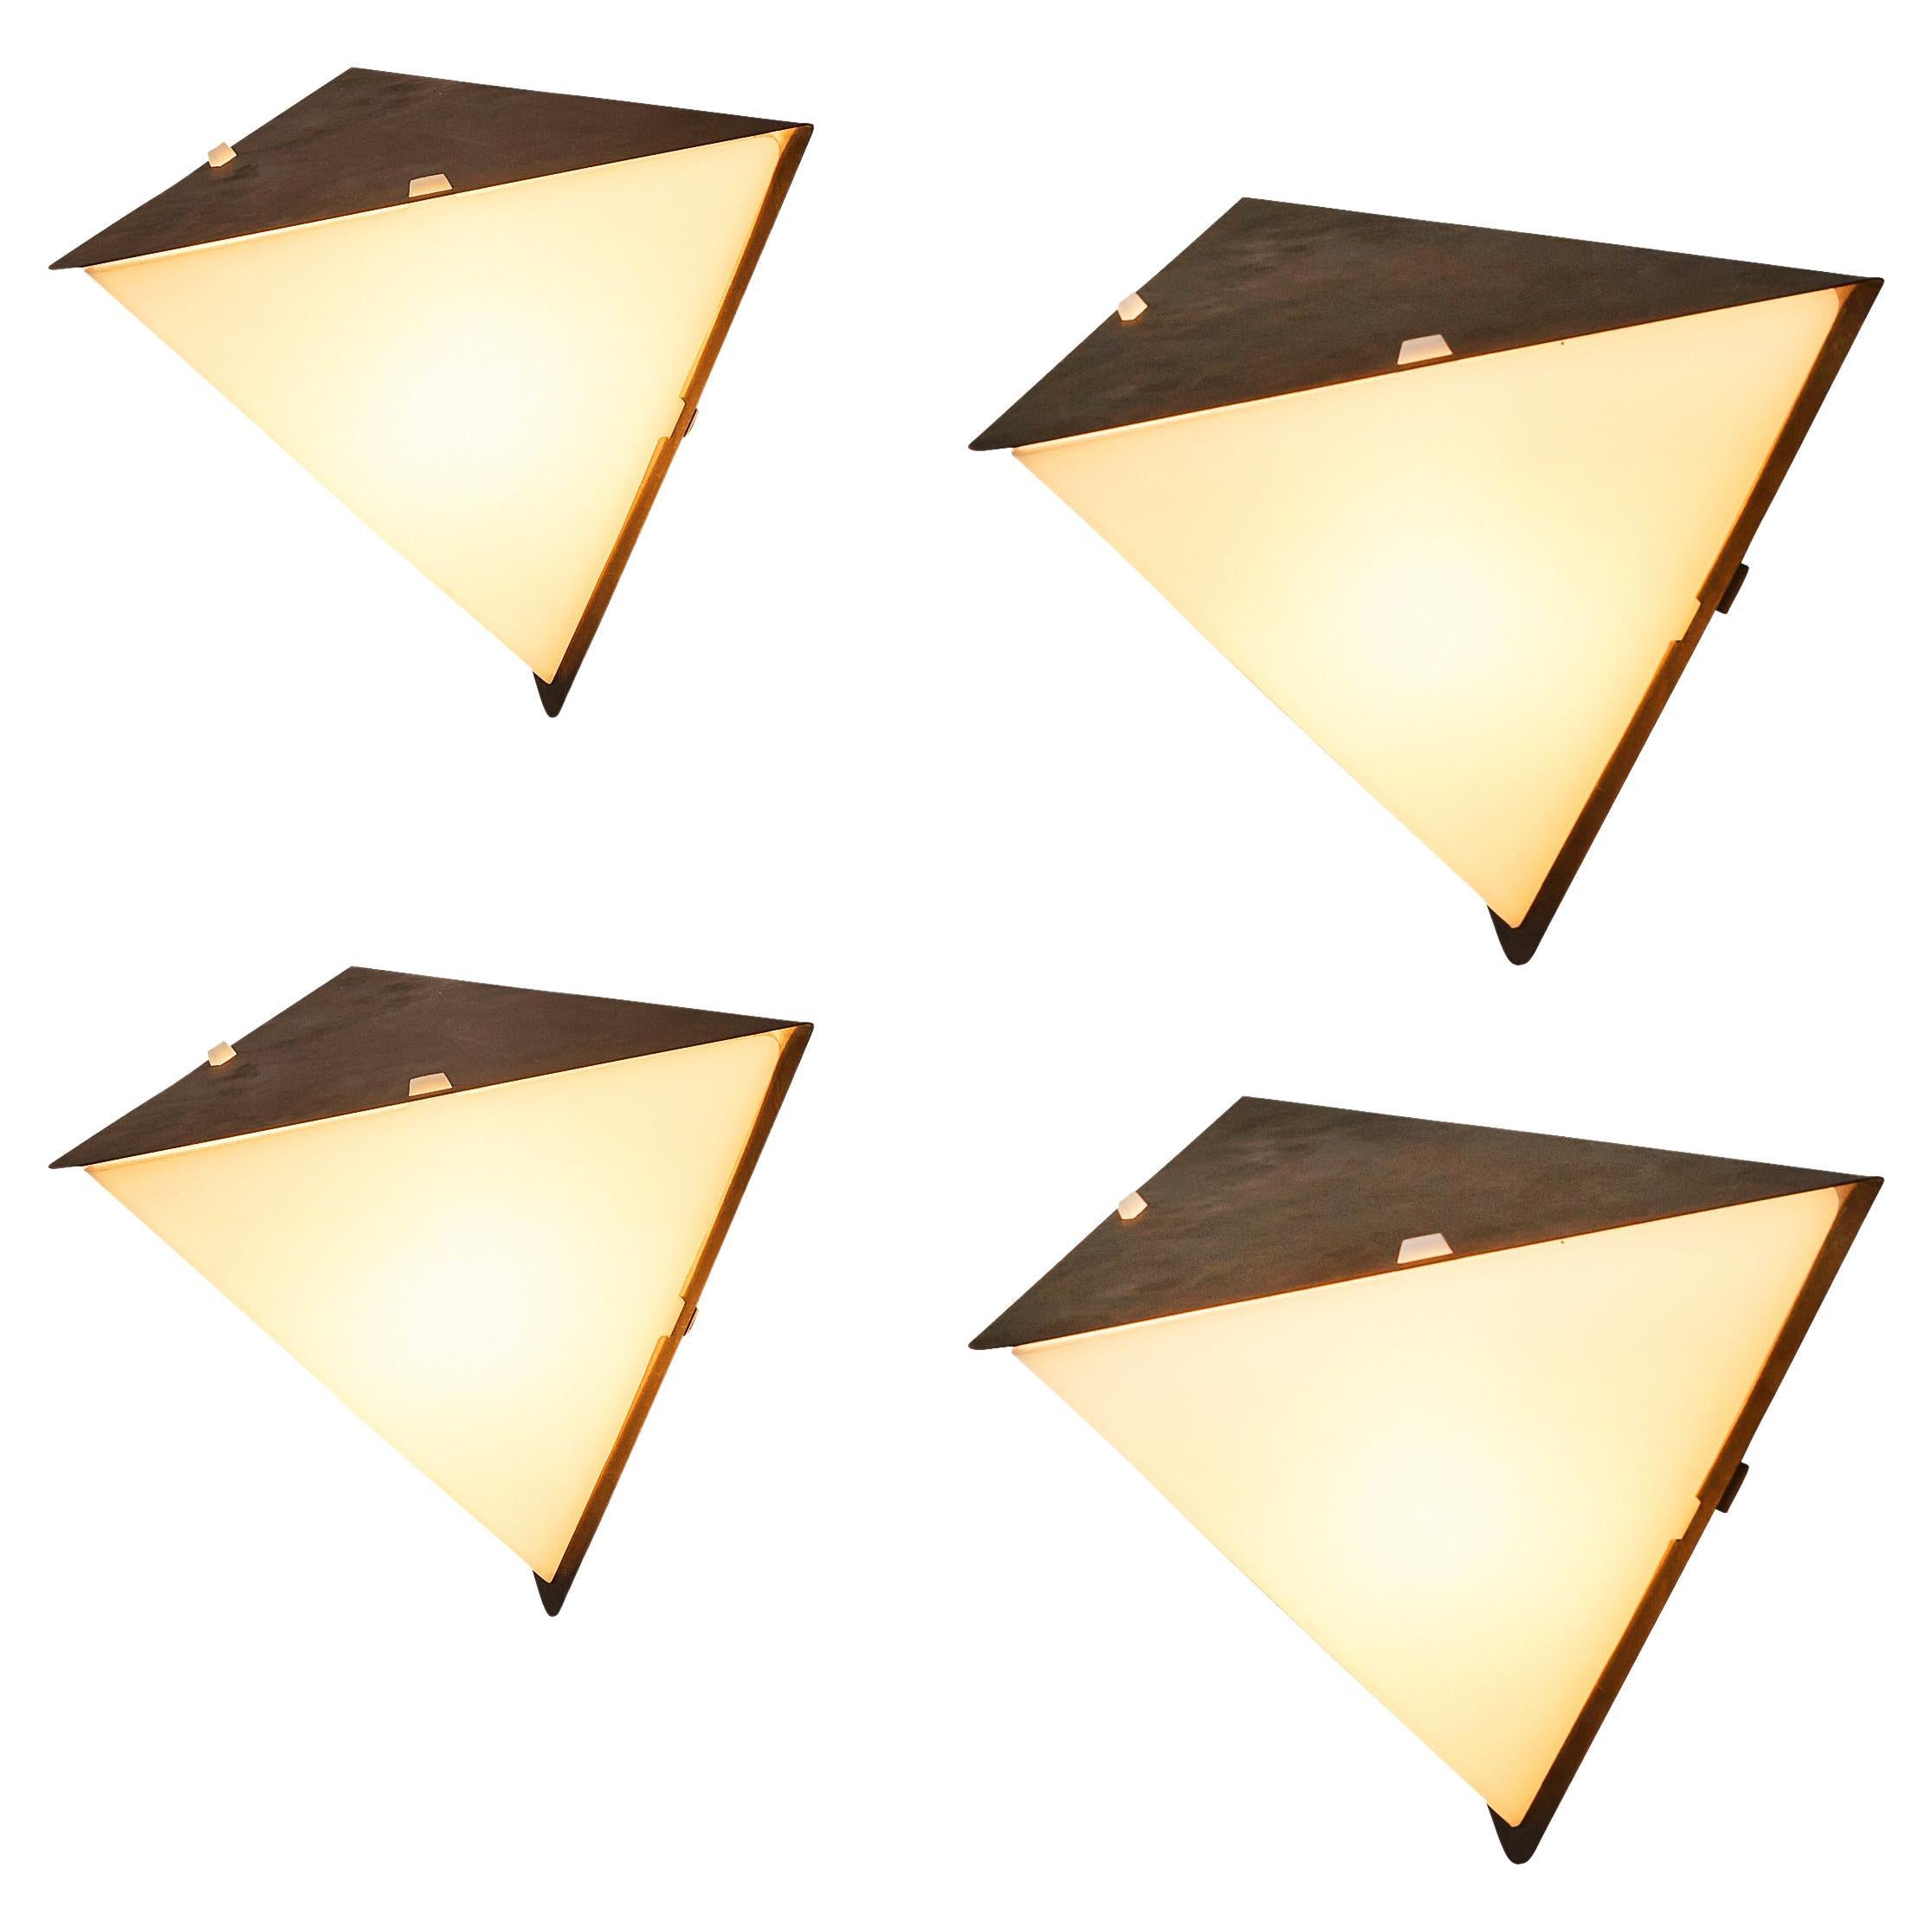 Rare Hans Agne Jakobsson Geometric Wall Lights in Copper and Akrylic